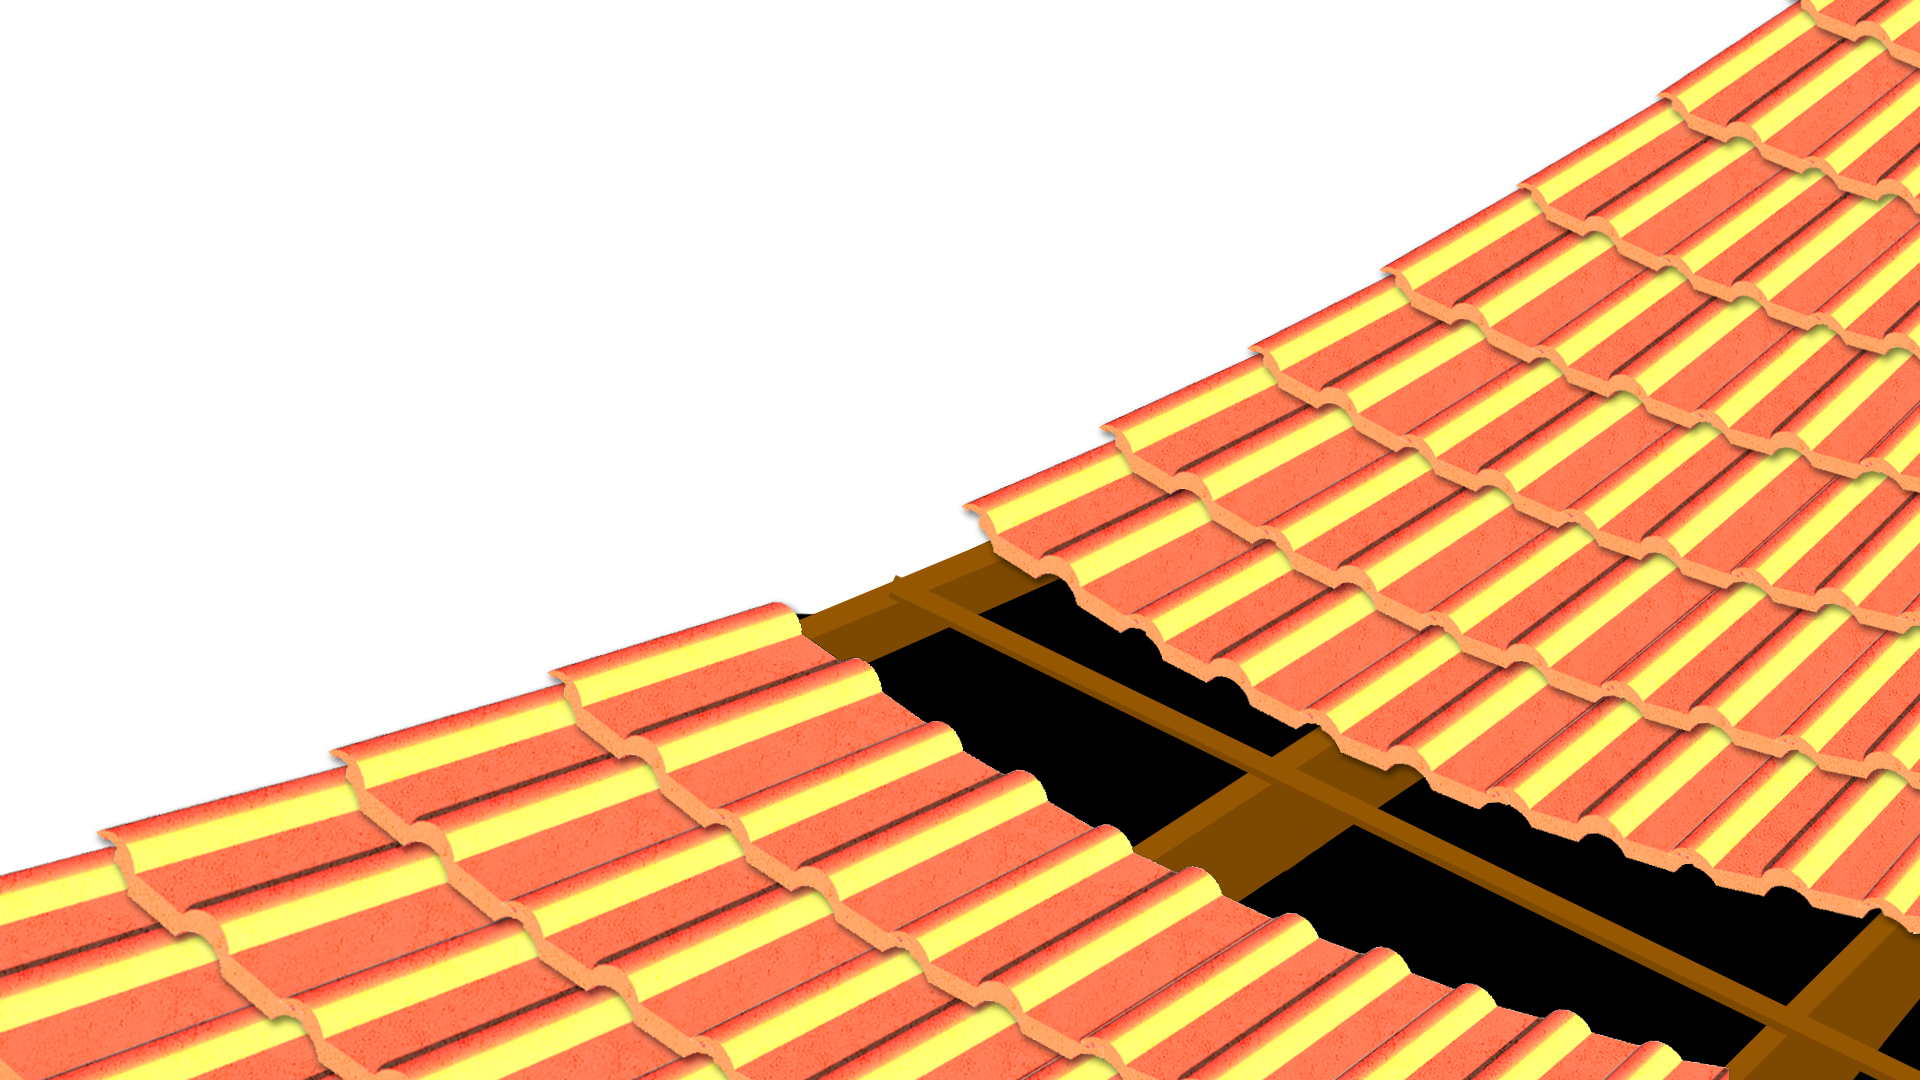 Mpumalanga roof tiles place for concrete tiles on roof